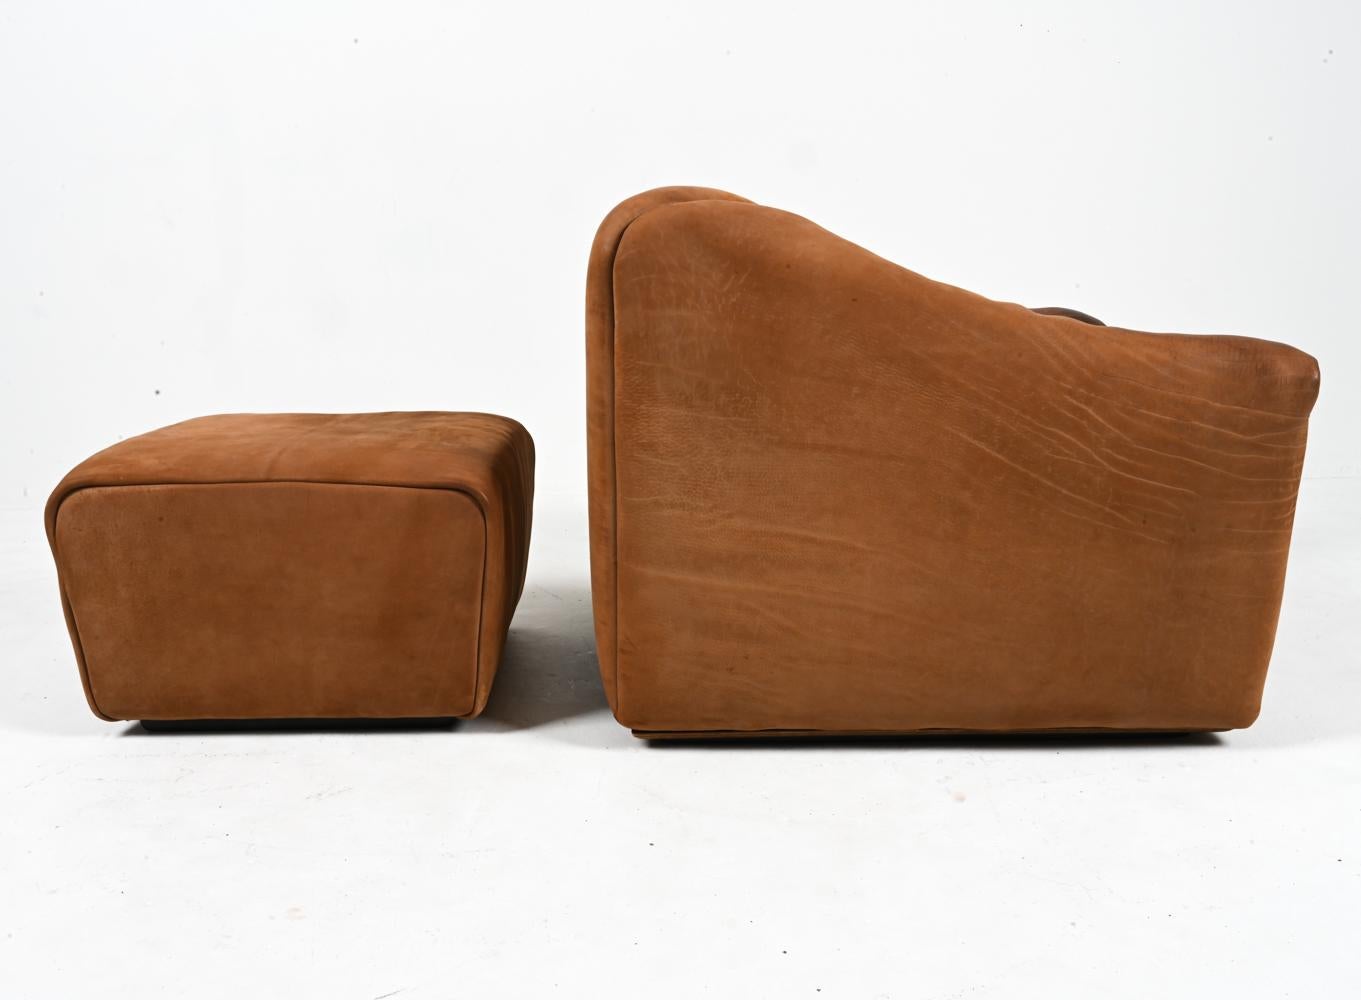 De Sede DS-47 Lounge Chair & Ottoman in Nubuck Leather, c. 1970's For Sale 7